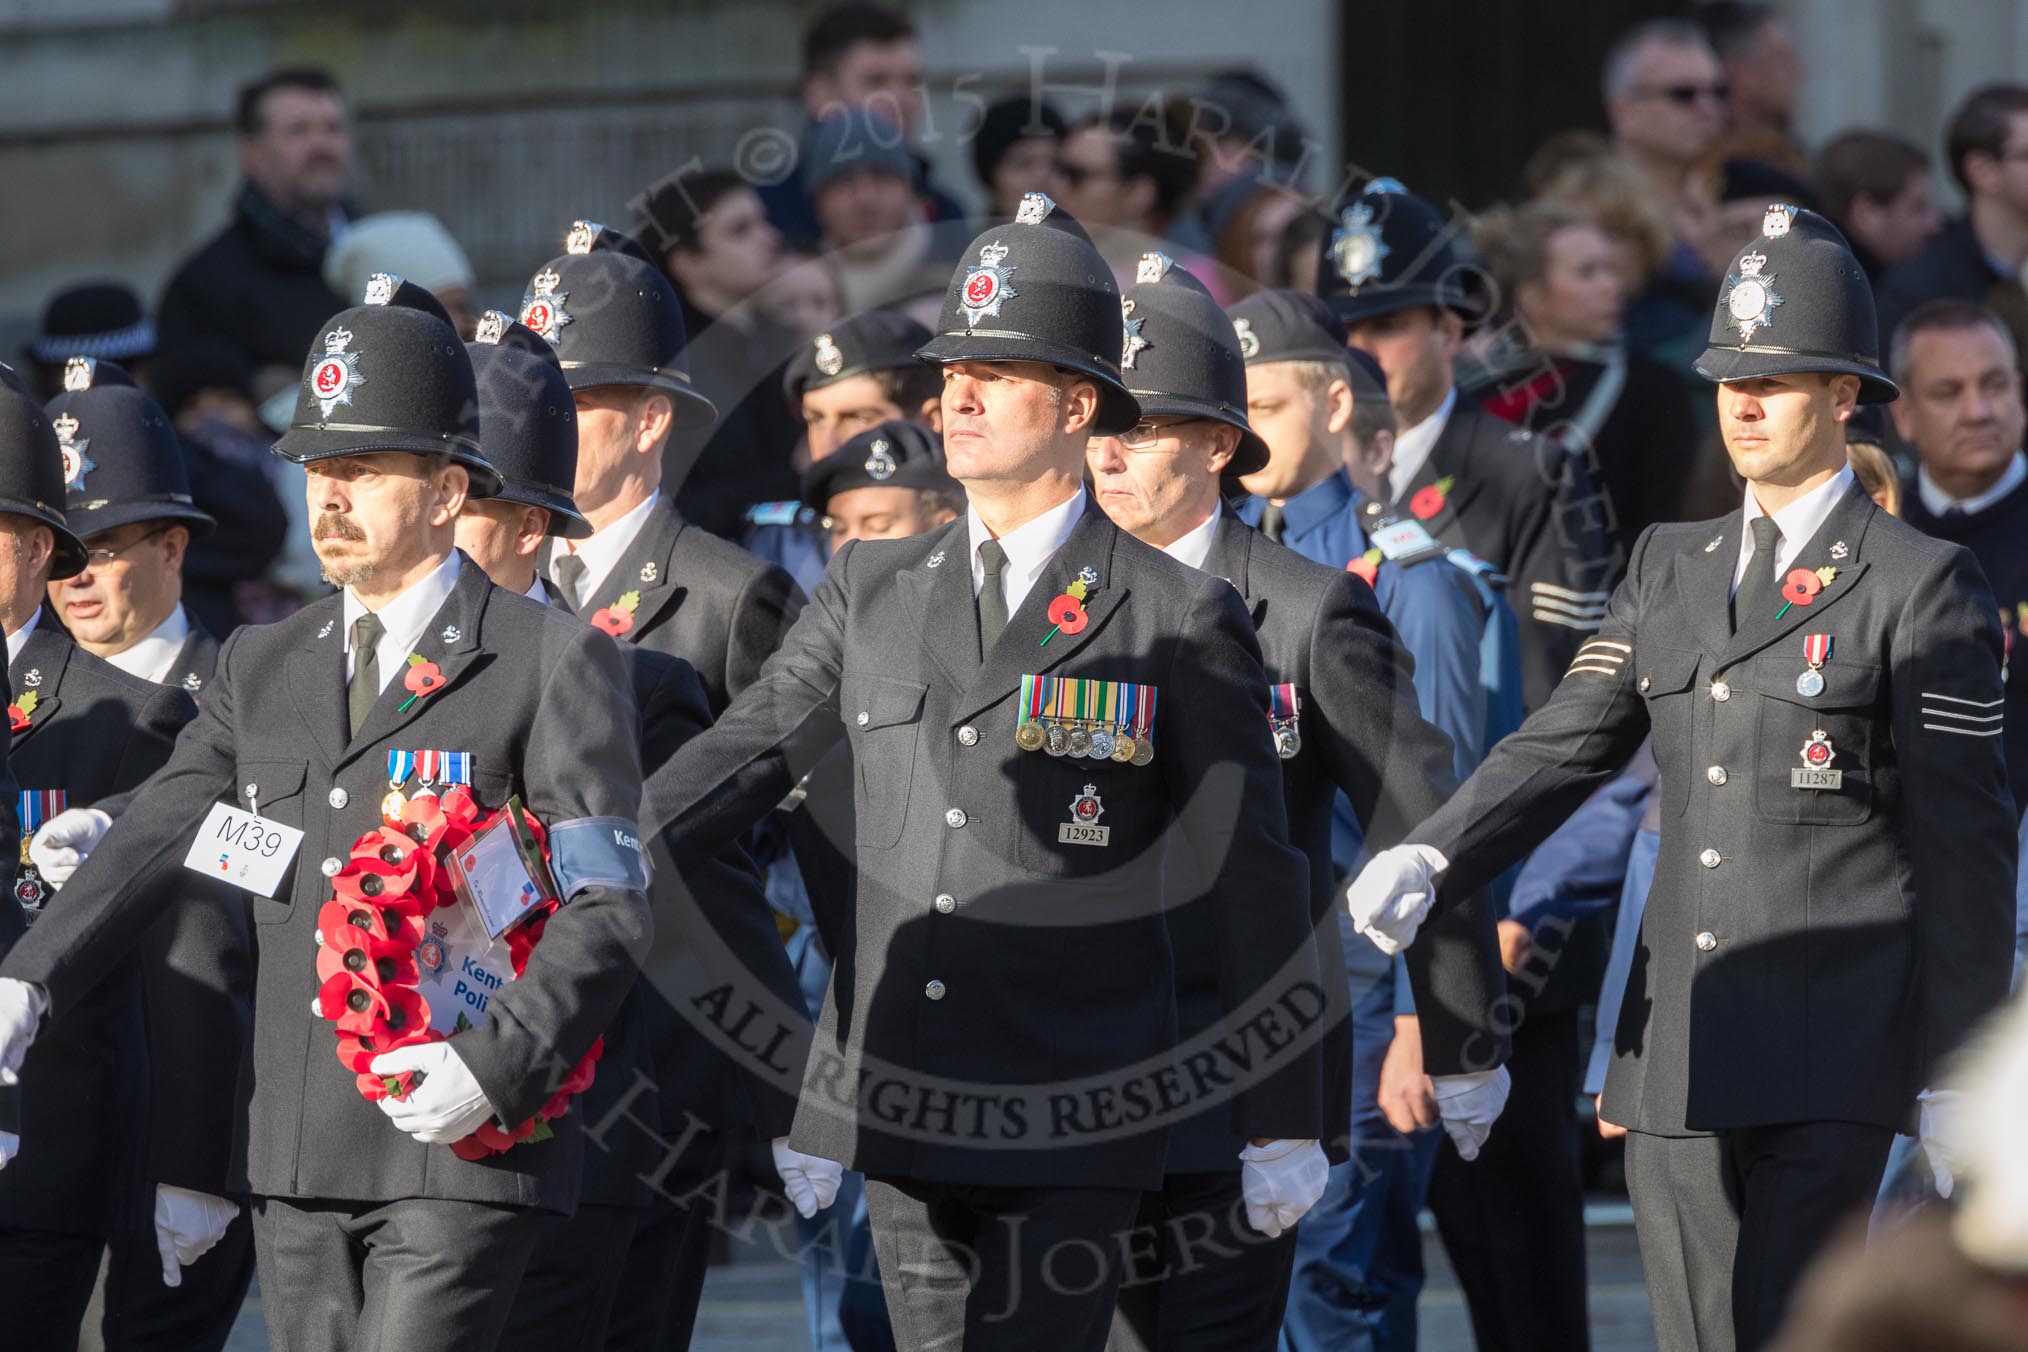 March Past, Remembrance Sunday at the Cenotaph 2016: M39 Kent Police.
Cenotaph, Whitehall, London SW1,
London,
Greater London,
United Kingdom,
on 13 November 2016 at 13:19, image #2936